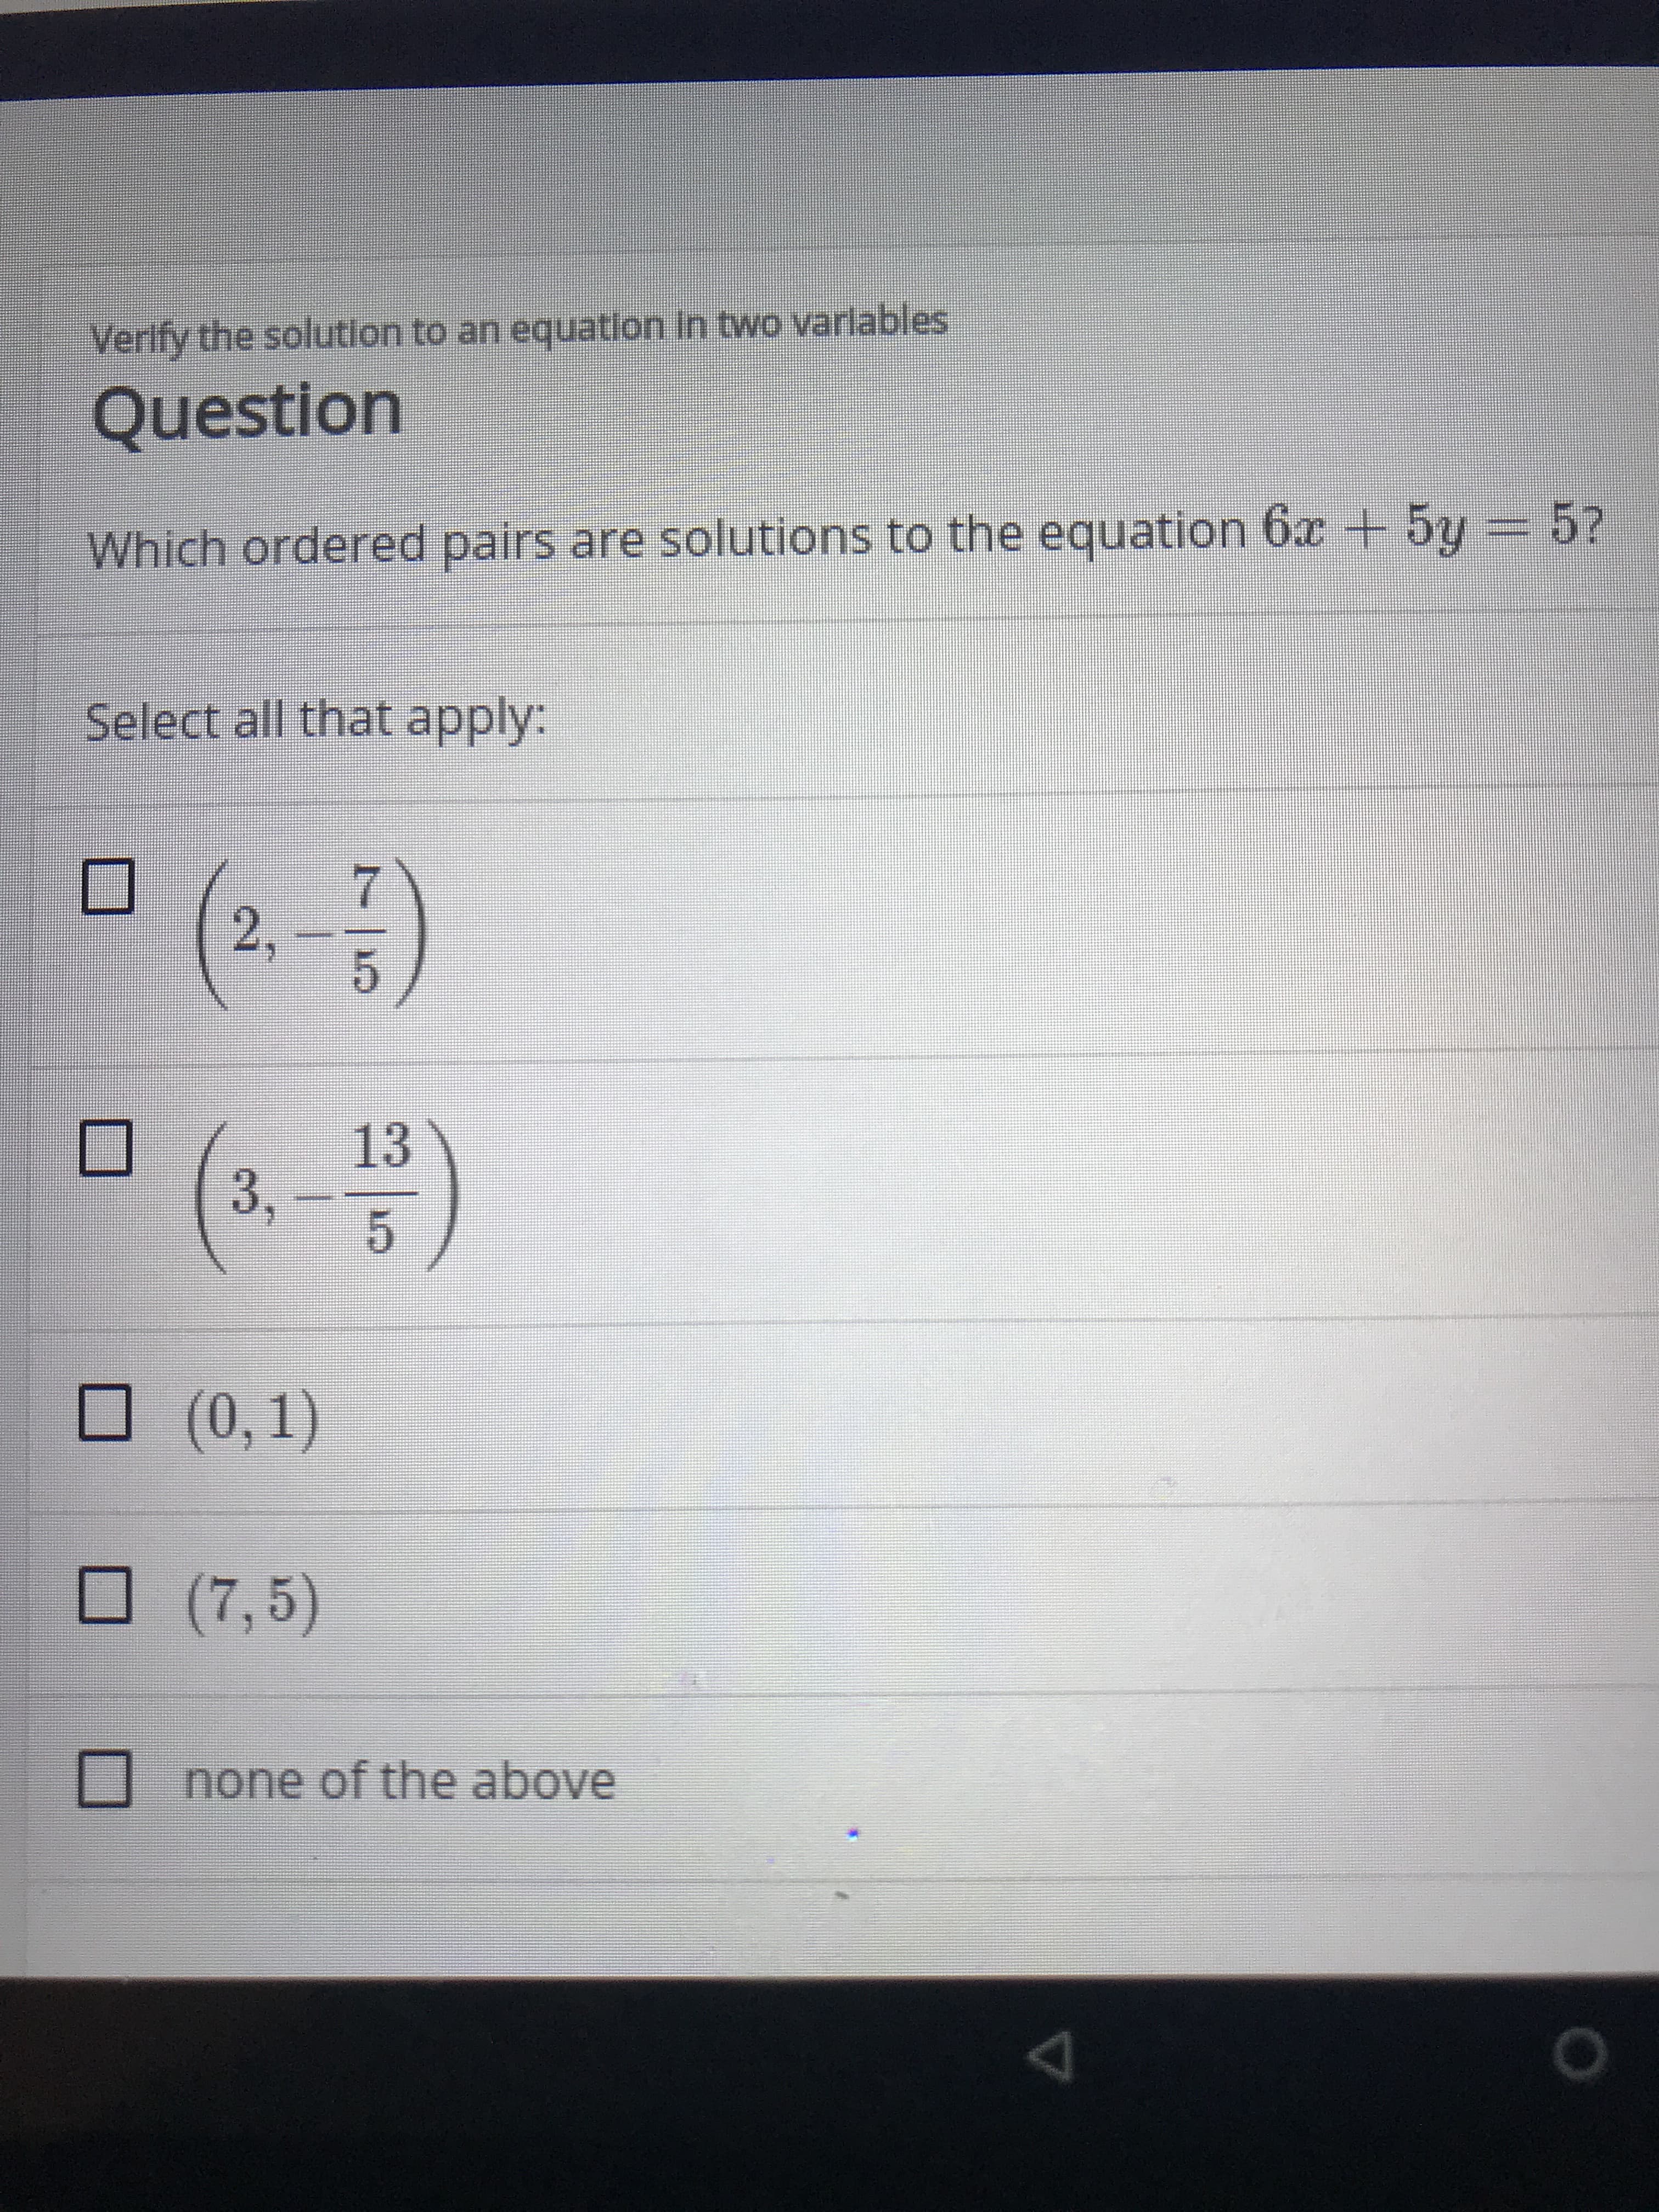 Verlfy the solution to an equatlon In two varlables
Question
Which ordered pairs are solutions to the equation 6x + 5y = 5?
Select all that apply:
2,
13
3,
(0, 1)
(7,5)
none of the above
